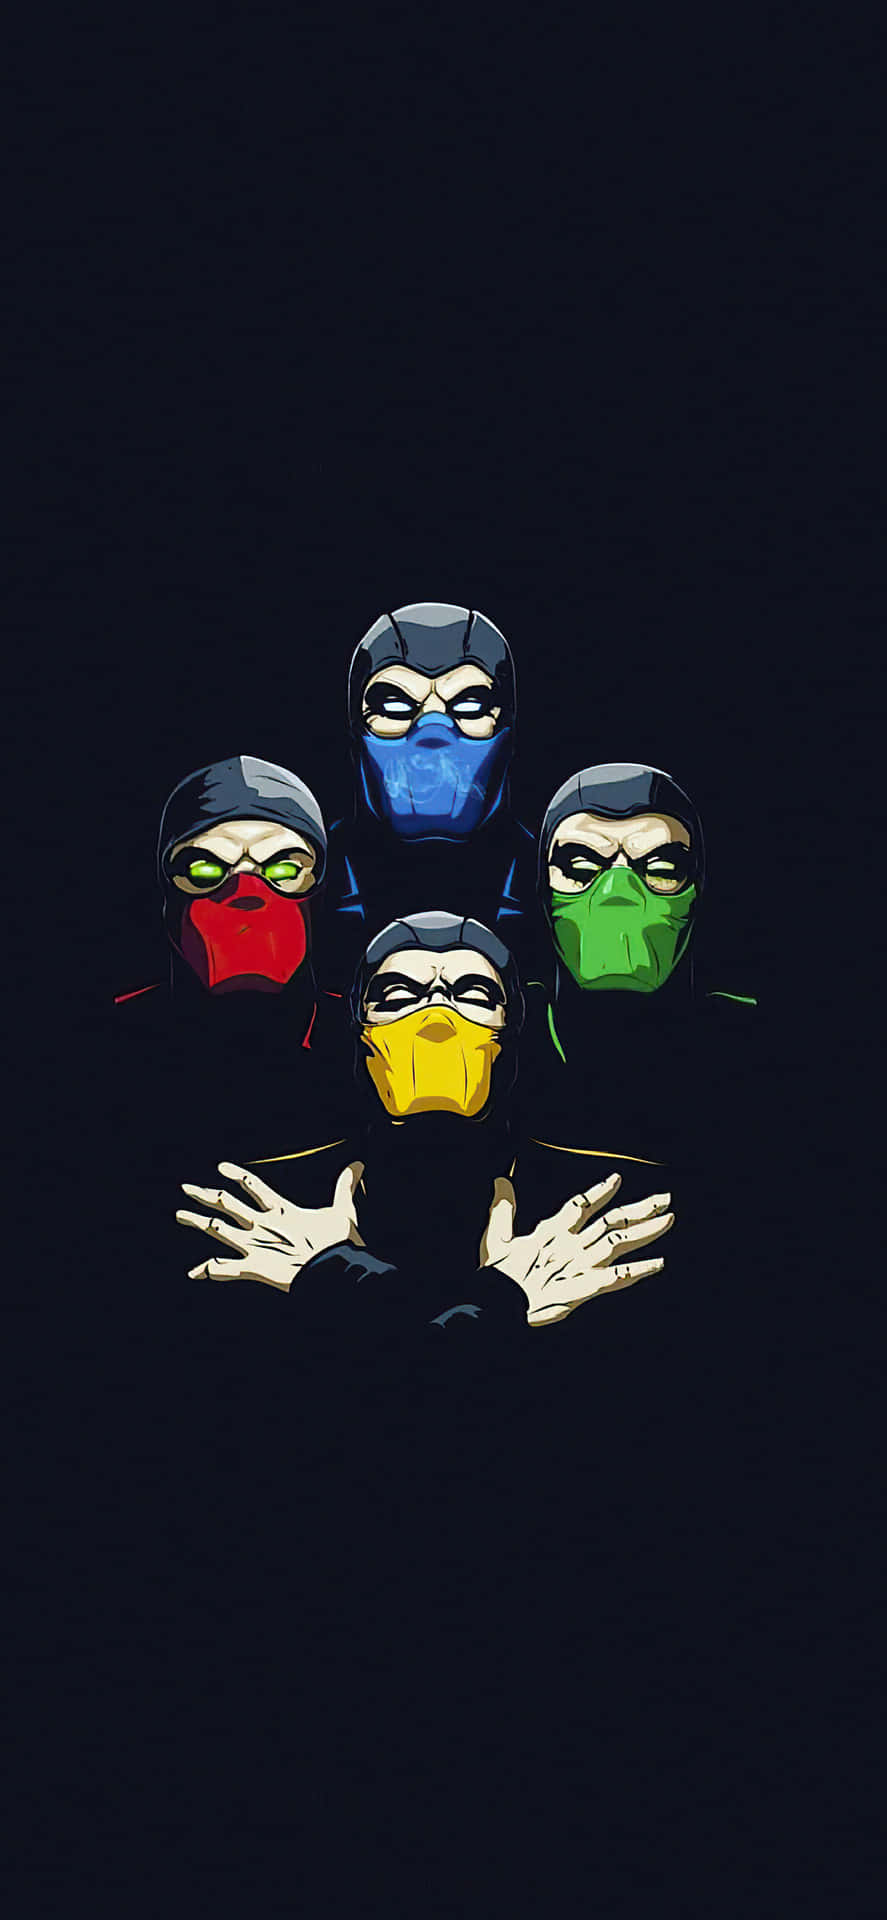 Enjoy the classic fighting game, Mortal Kombat, anywhere with the Iphone Wallpaper